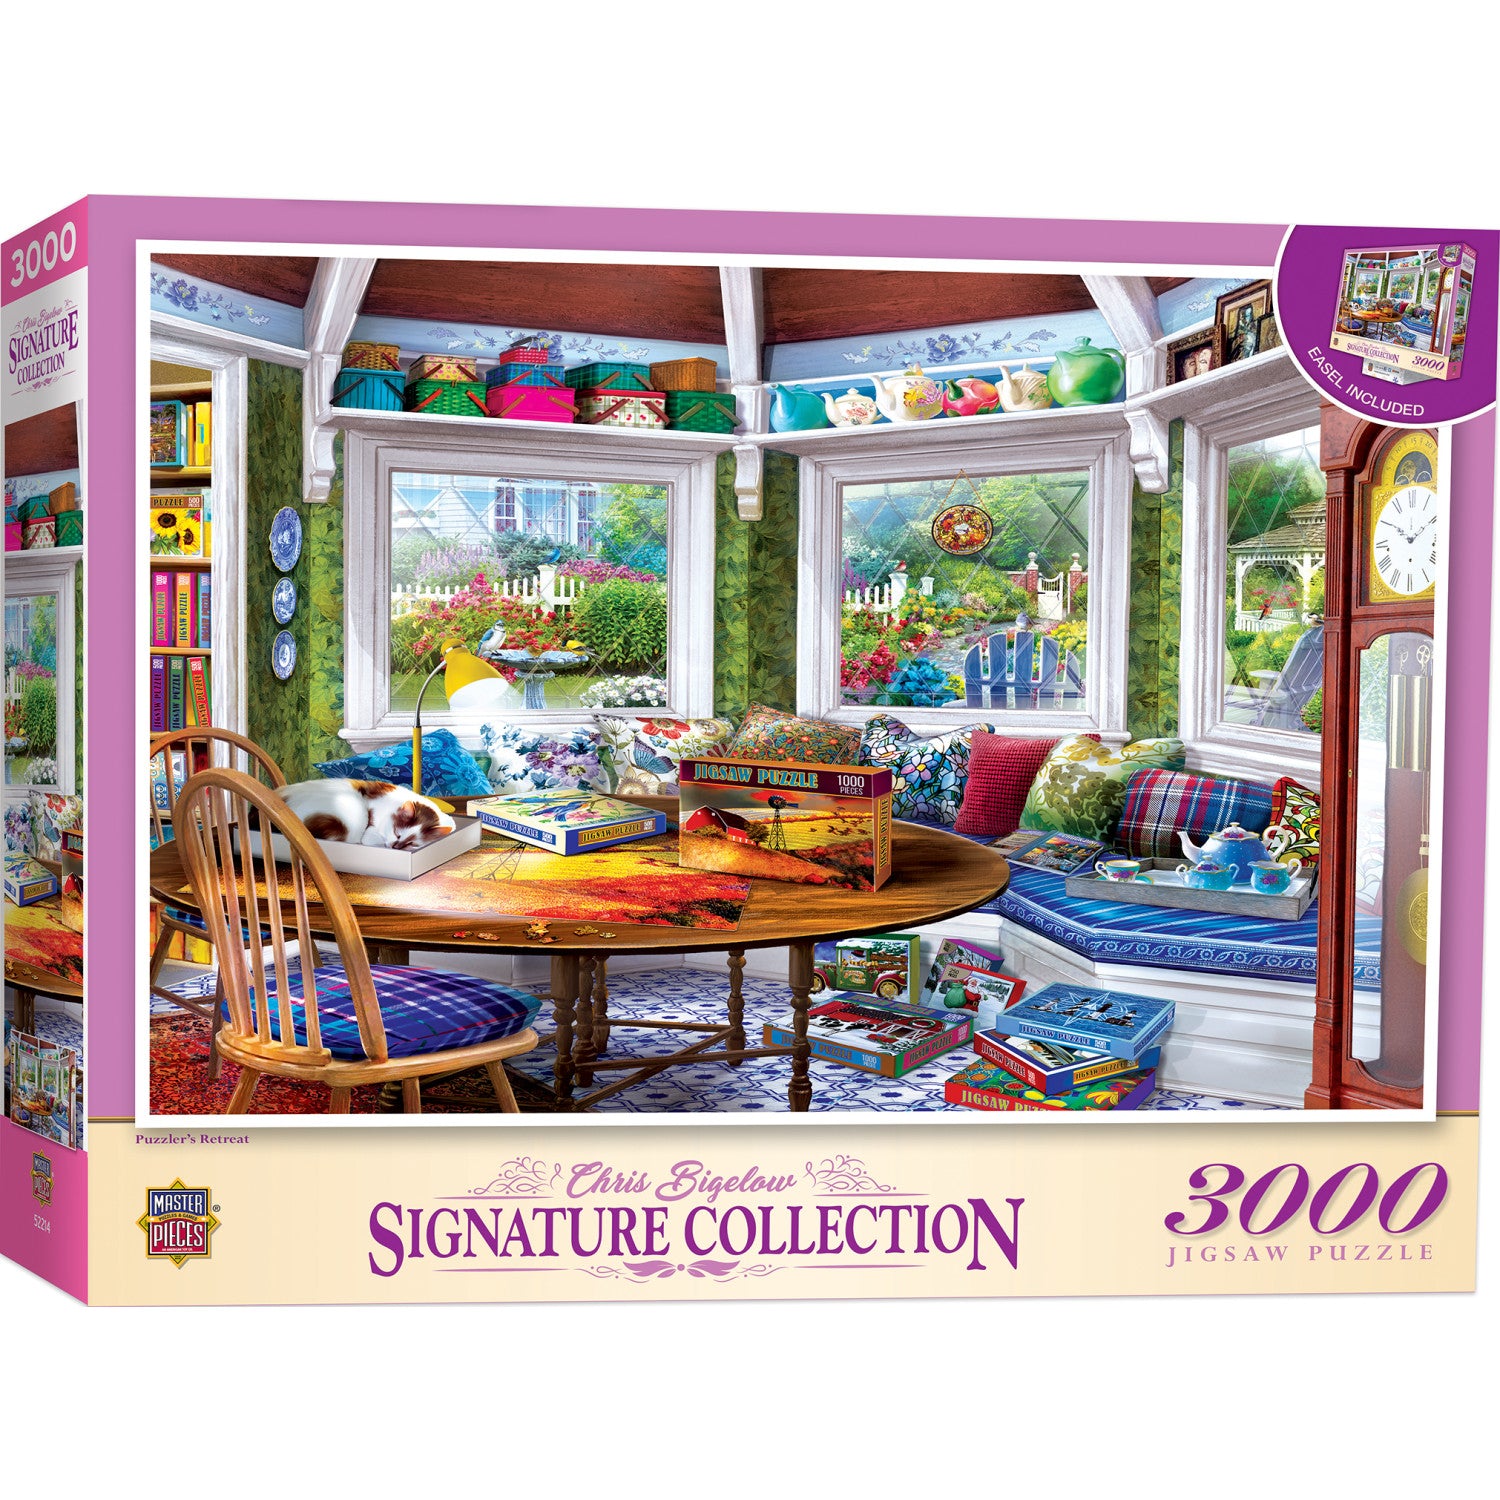 Signature Collection - Puzzler's Retreat 3000 Piece Jigsaw Puzzle